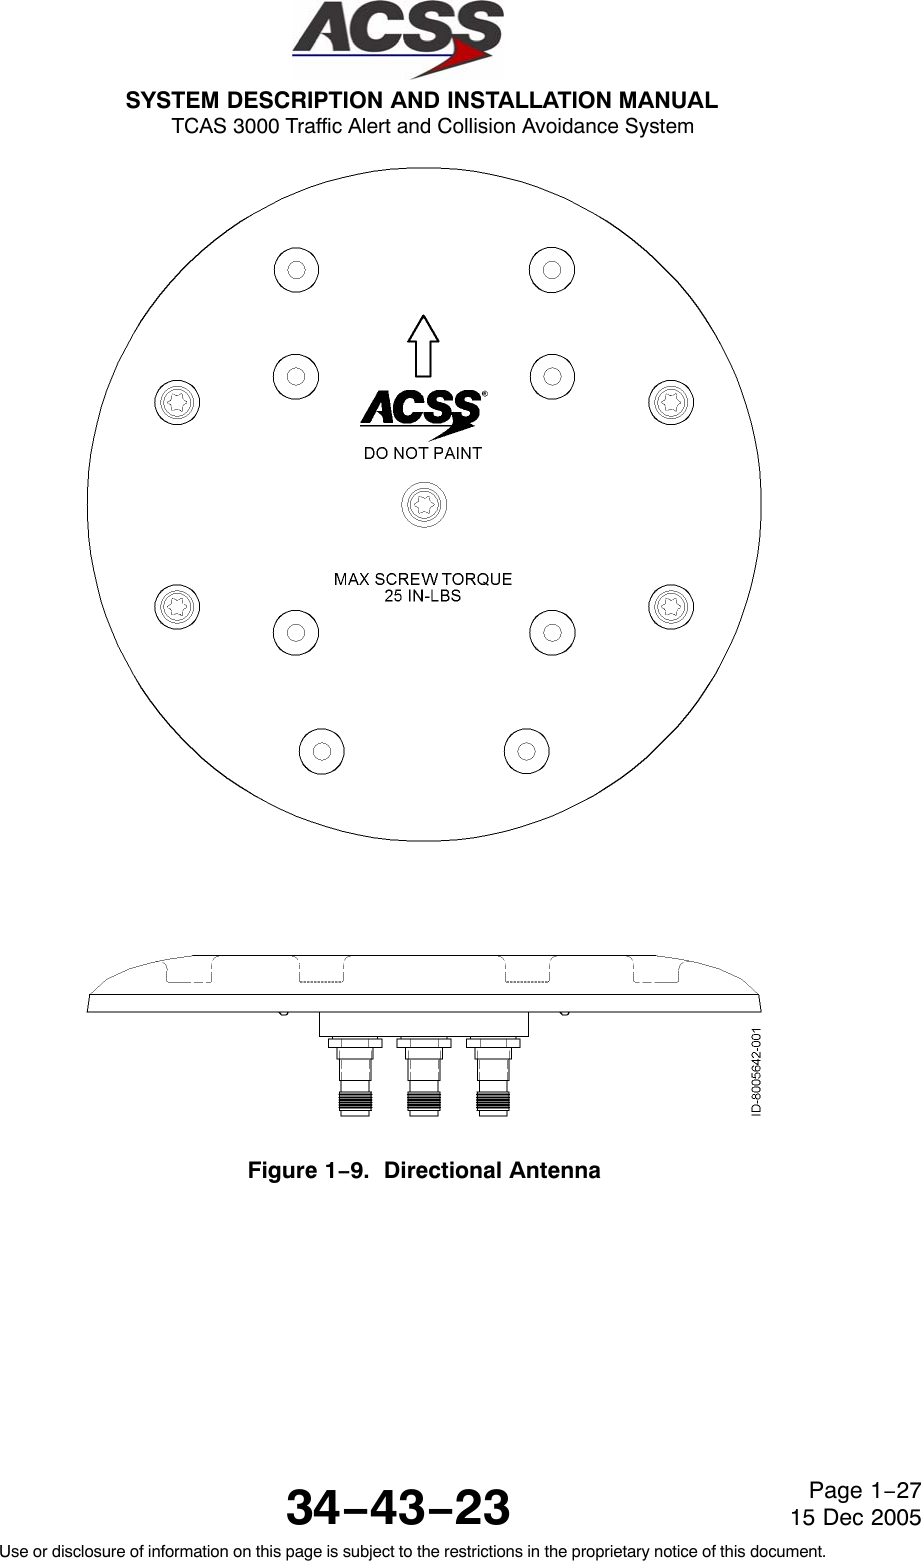 SYSTEM DESCRIPTION AND INSTALLATION MANUAL TCAS 3000 Traffic Alert and Collision Avoidance System34−43−23Use or disclosure of information on this page is subject to the restrictions in the proprietary notice of this document.Page 1−2715 Dec 2005Figure 1−9.  Directional Antenna